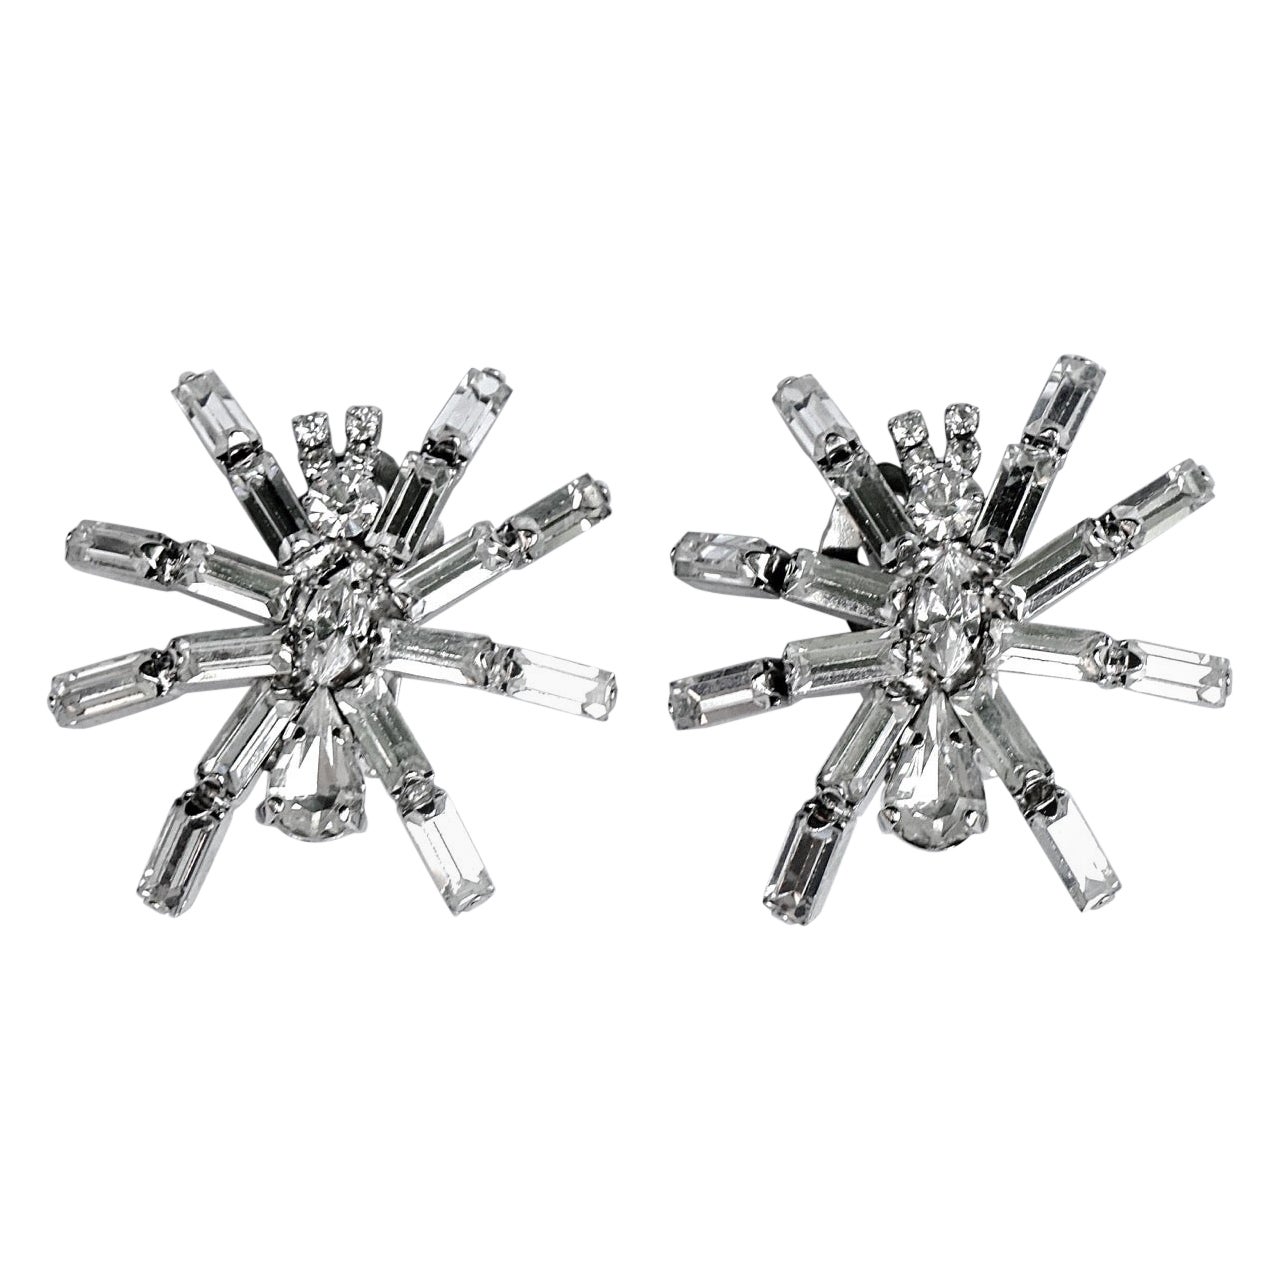 Silver Tone and Clear Rhinestone Clip On Spider Earrings, circa 1980s